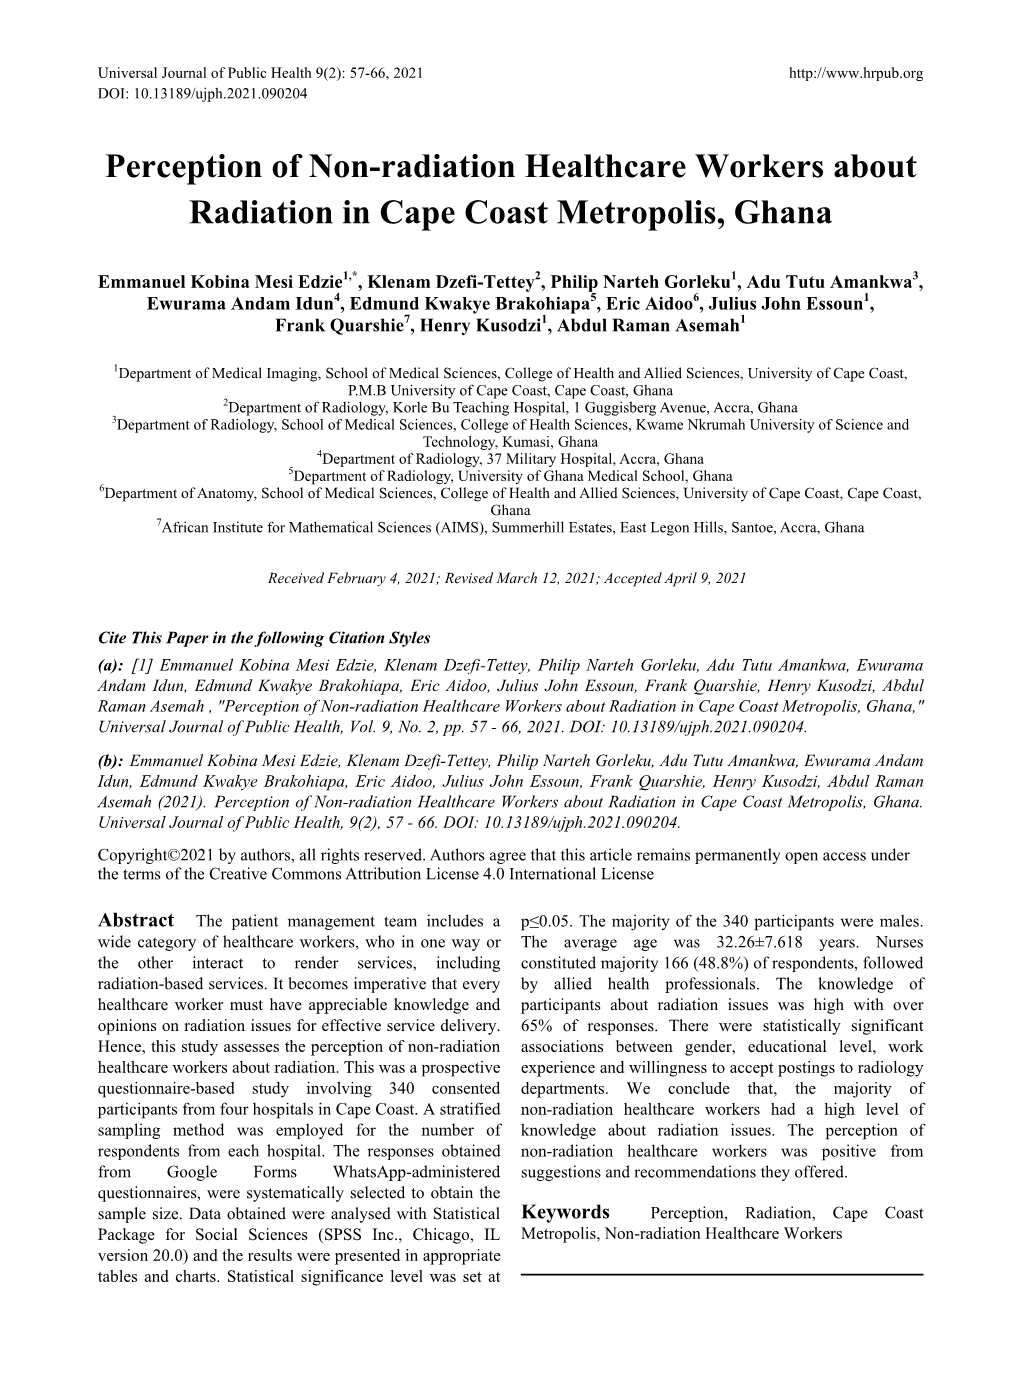 Perception of Non-Radiation Healthcare Workers About Radiation in Cape Coast Metropolis, Ghana